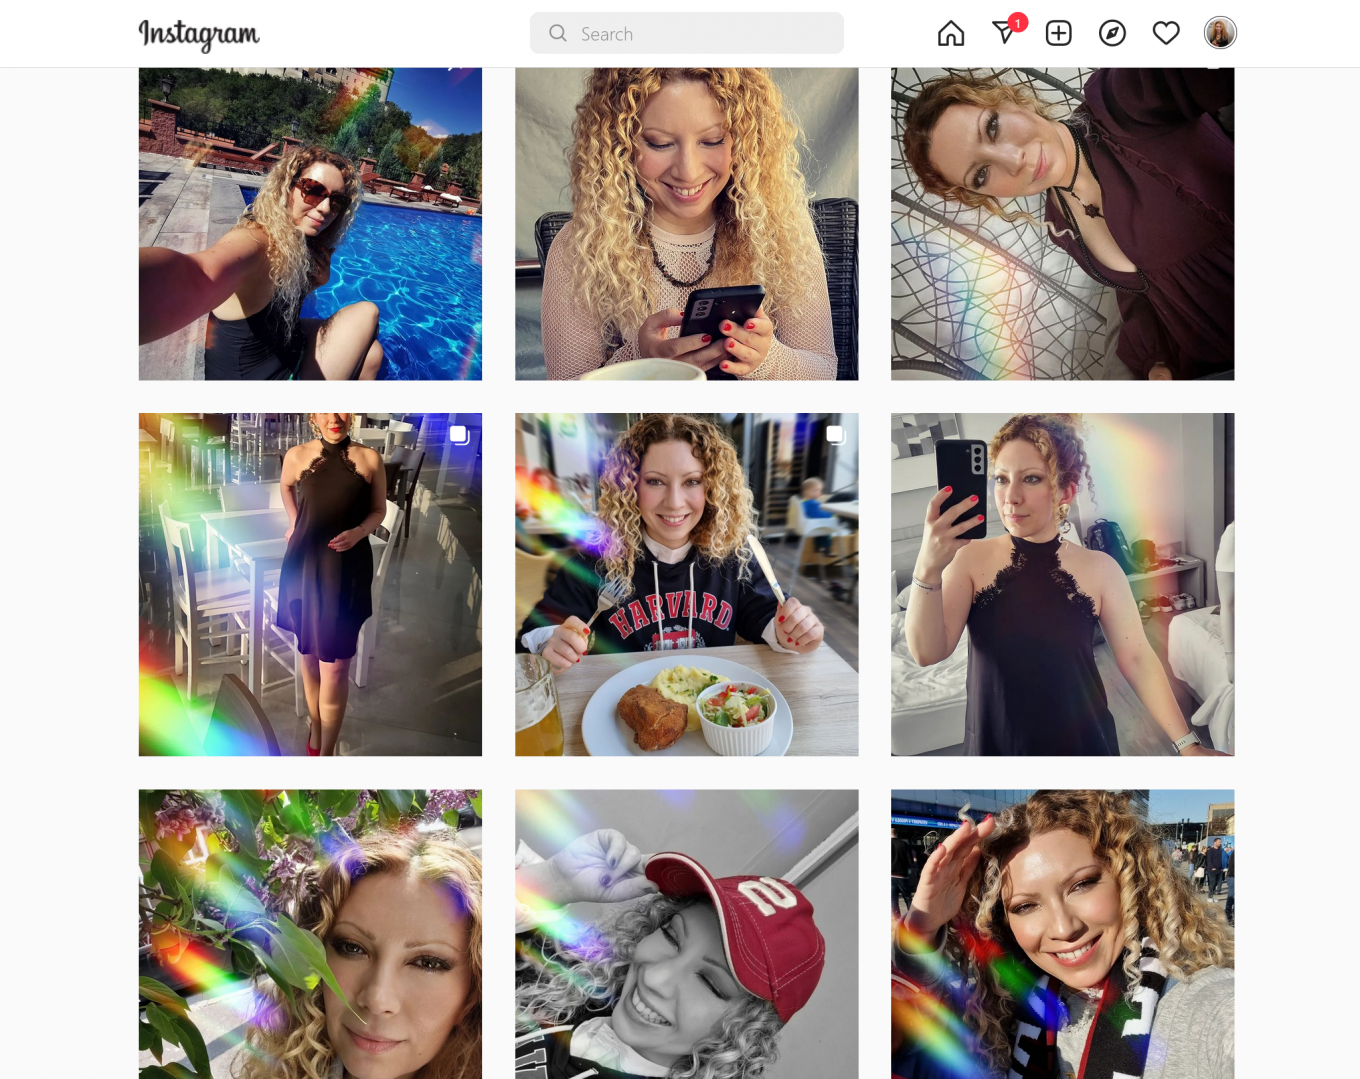 400+ Best Instagram Captions for Photos and Selfies